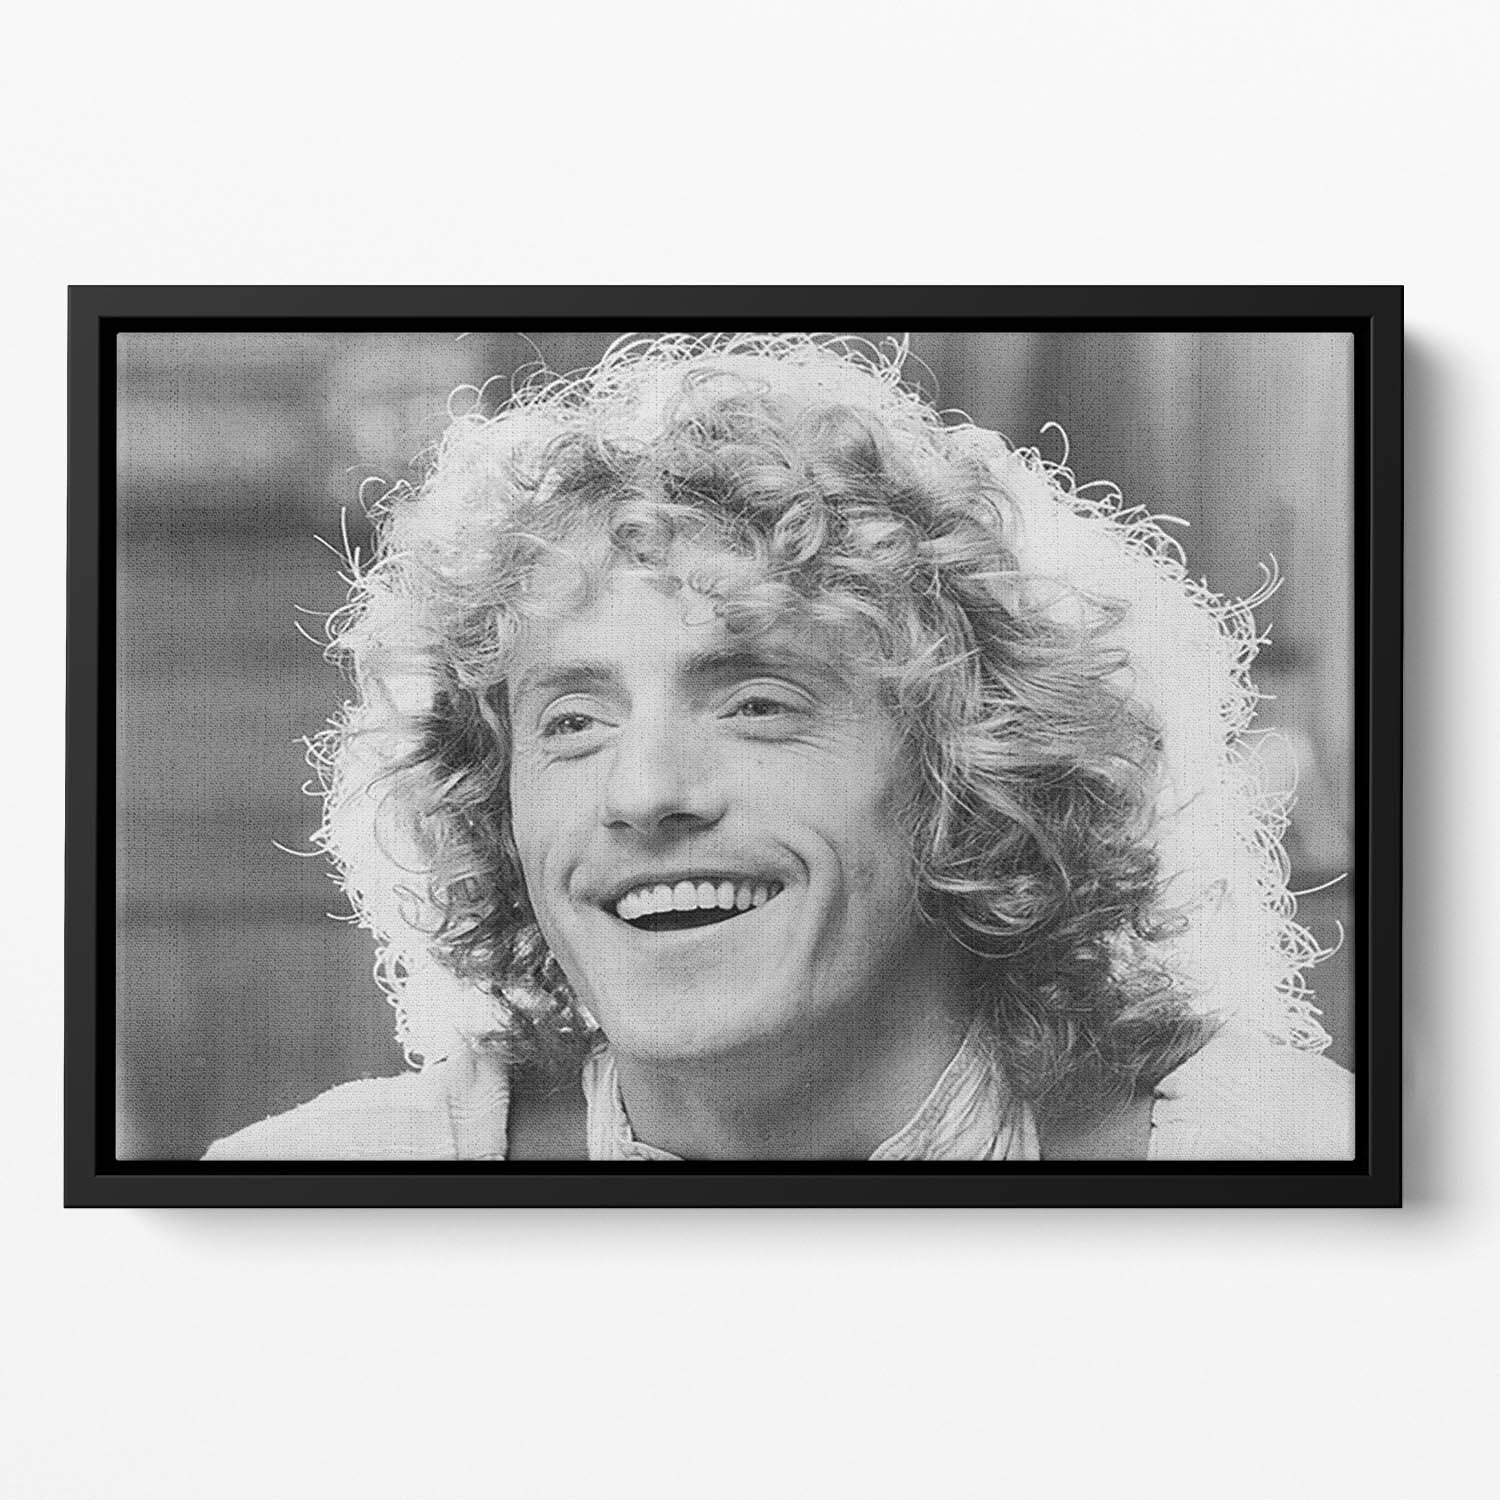 Roger Daltrey of The Who Floating Framed Canvas